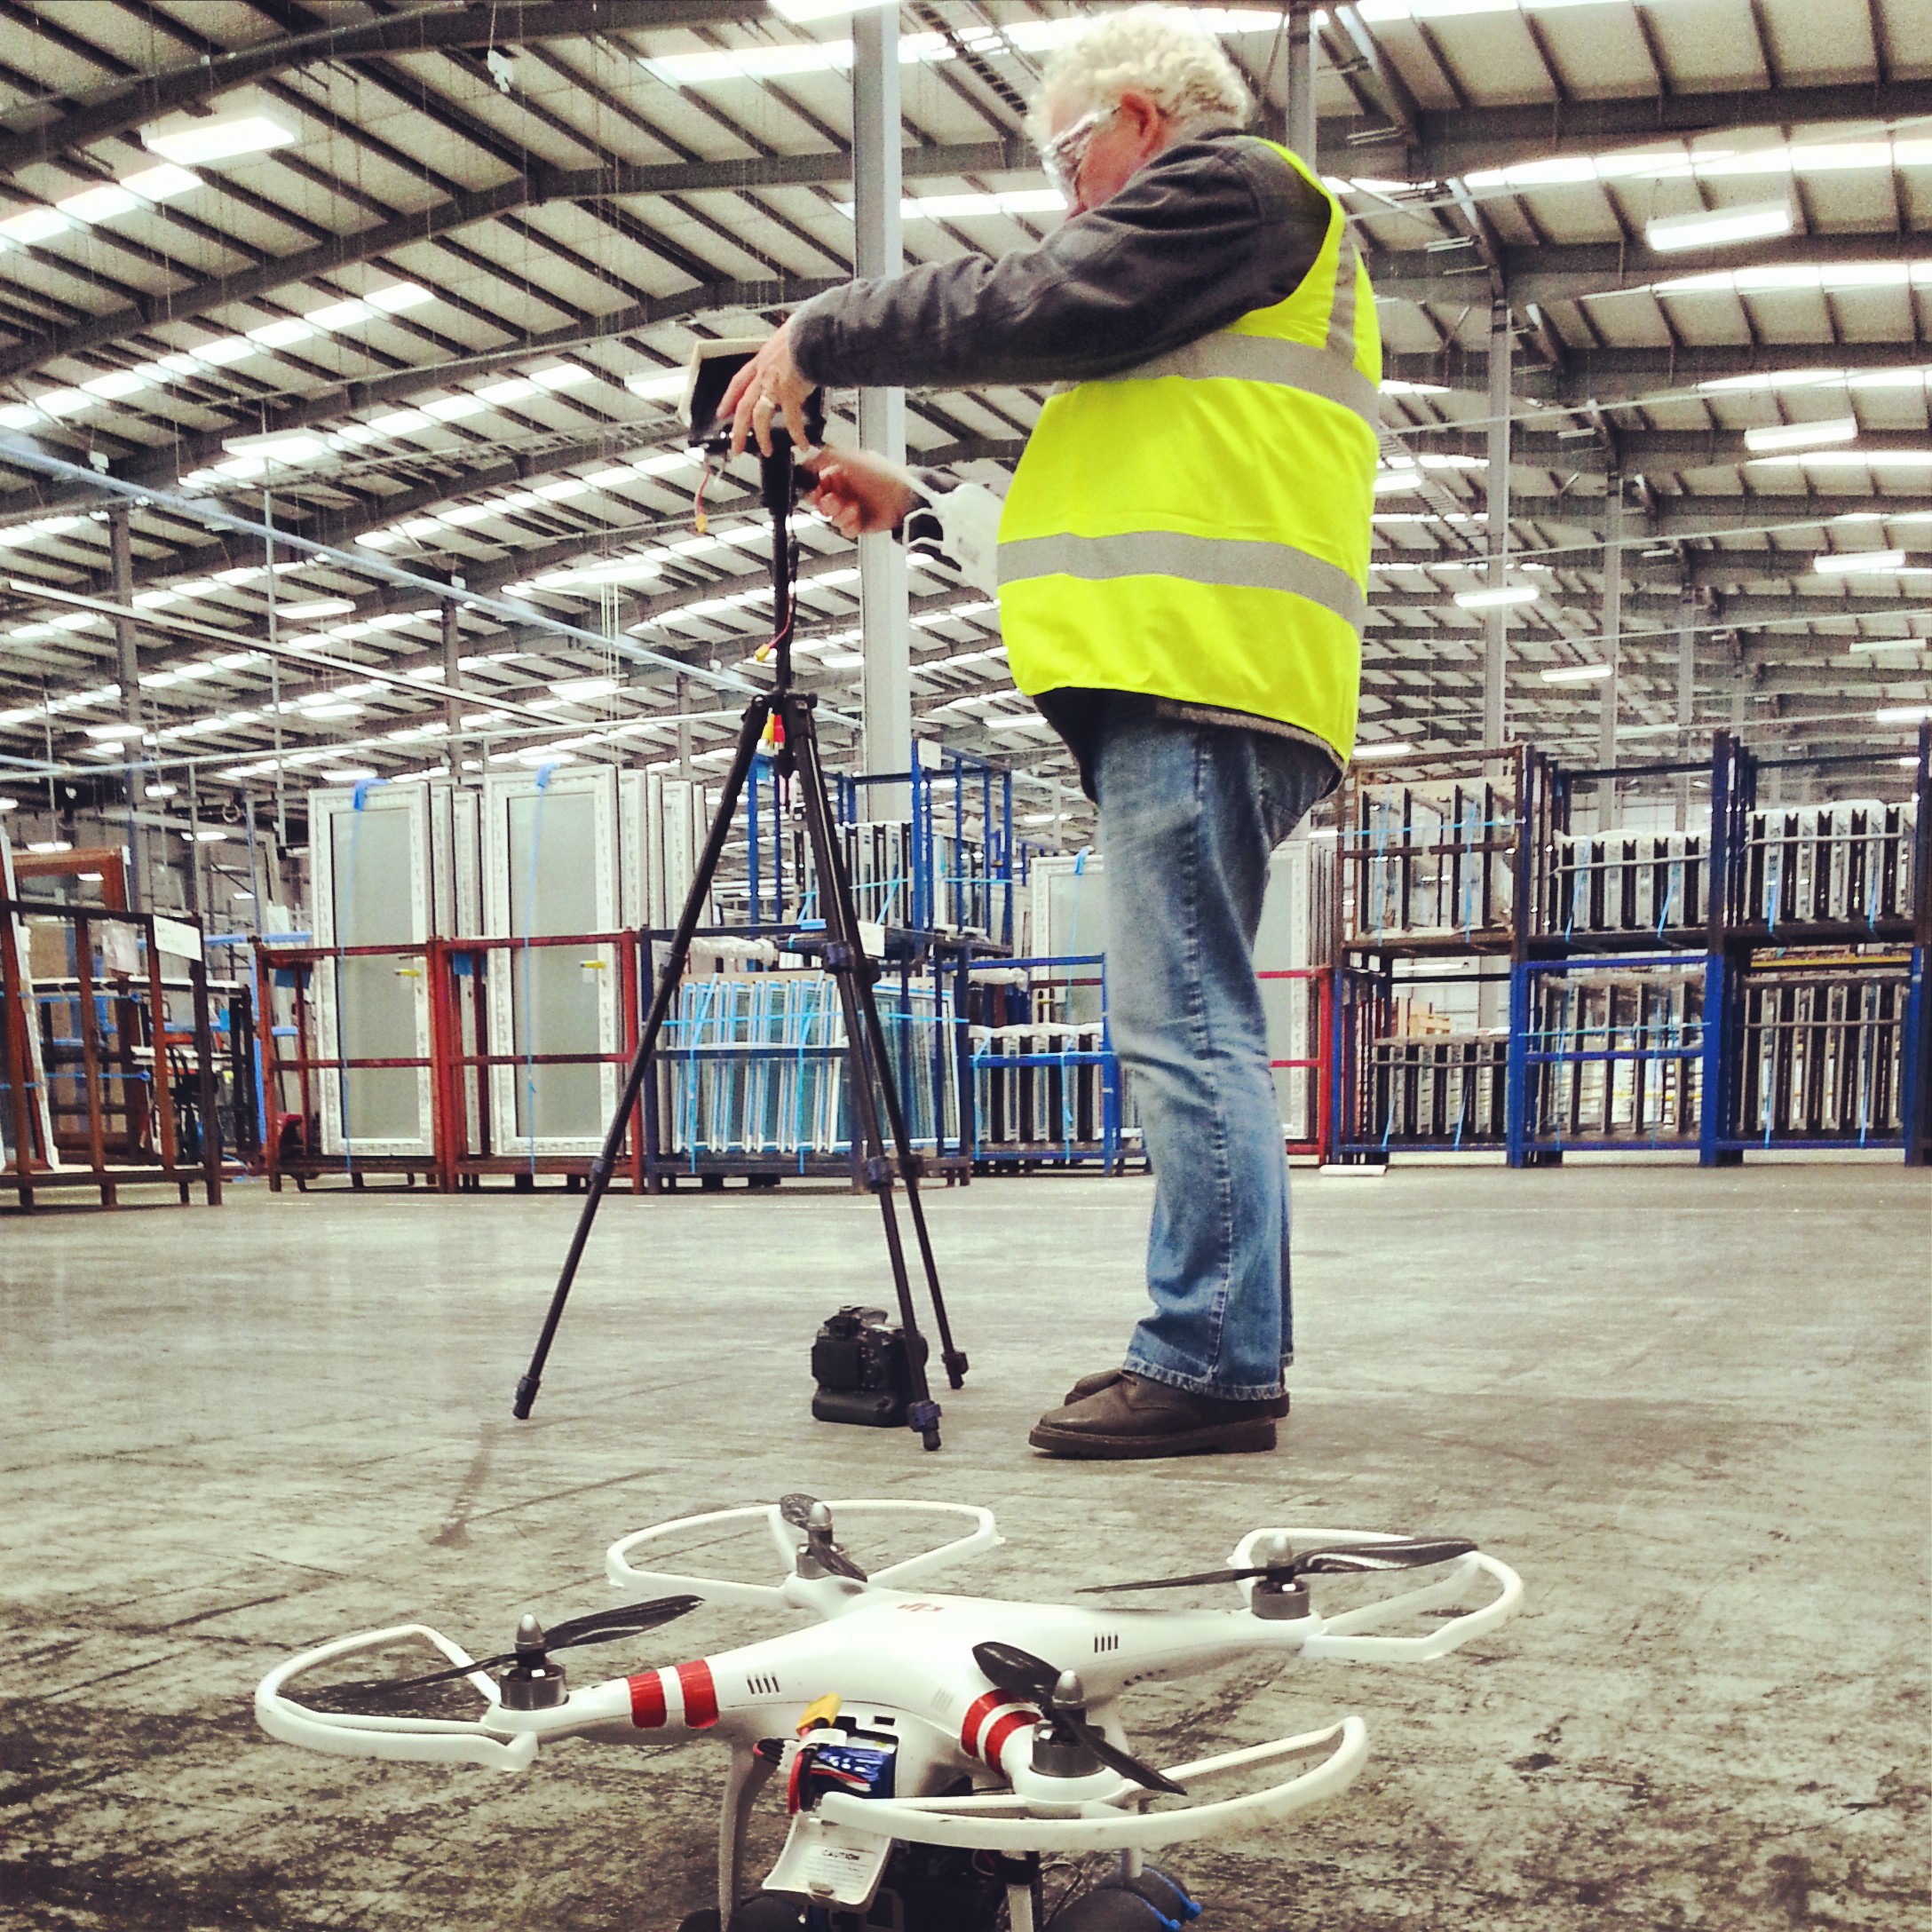 Drone | Motiv Productions - Creating Video for Business